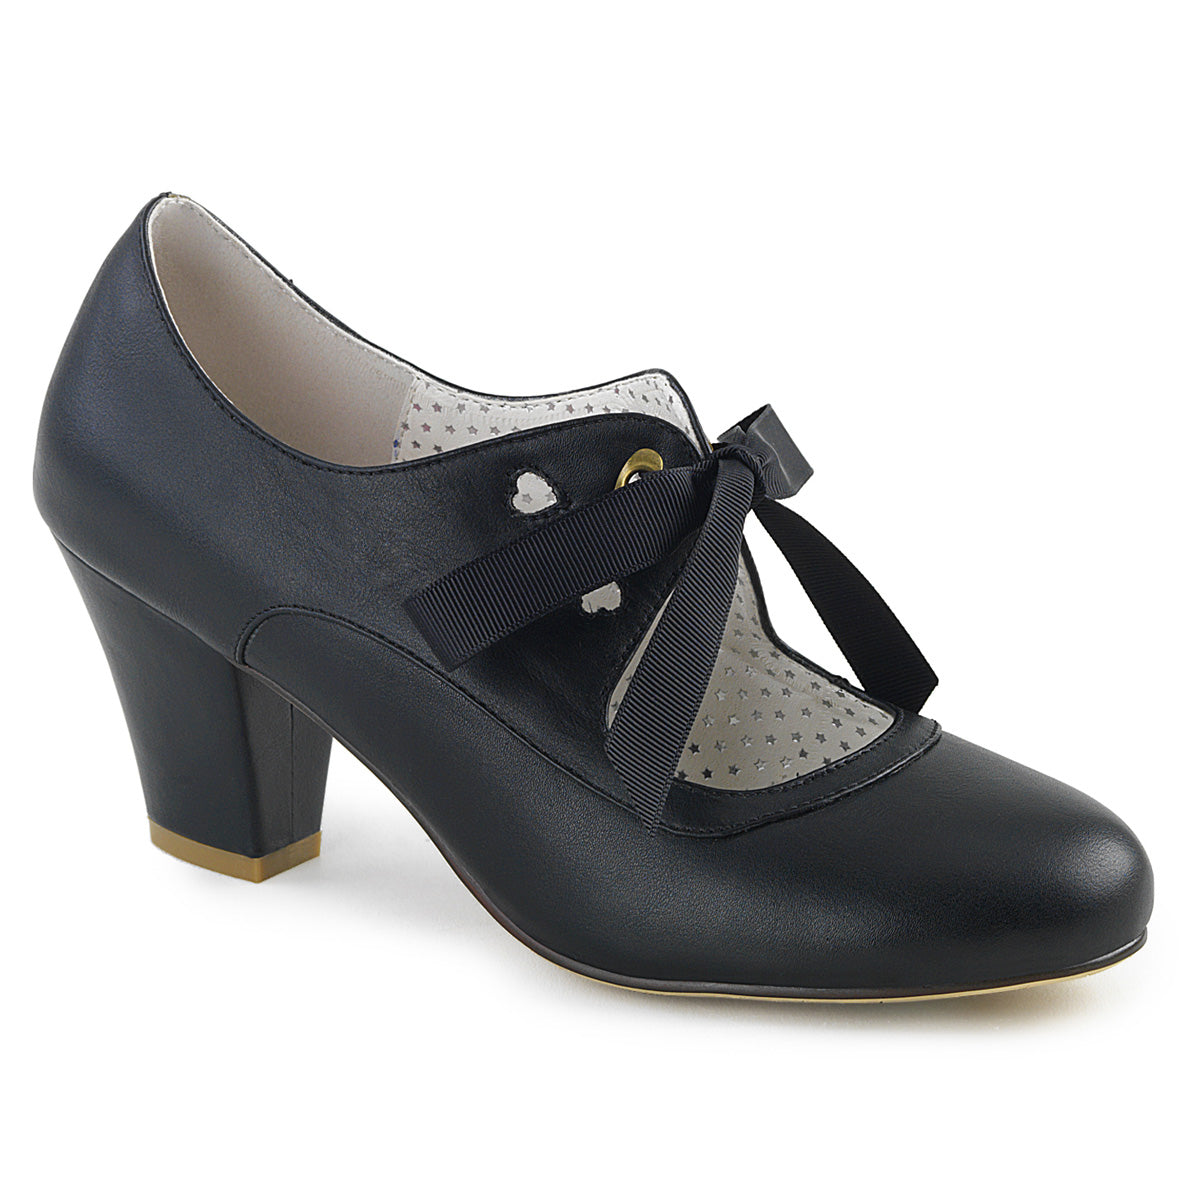 WIGGLE-32 Pin Up Couture Glamour 2.5" Heel Black Fetish Shoe